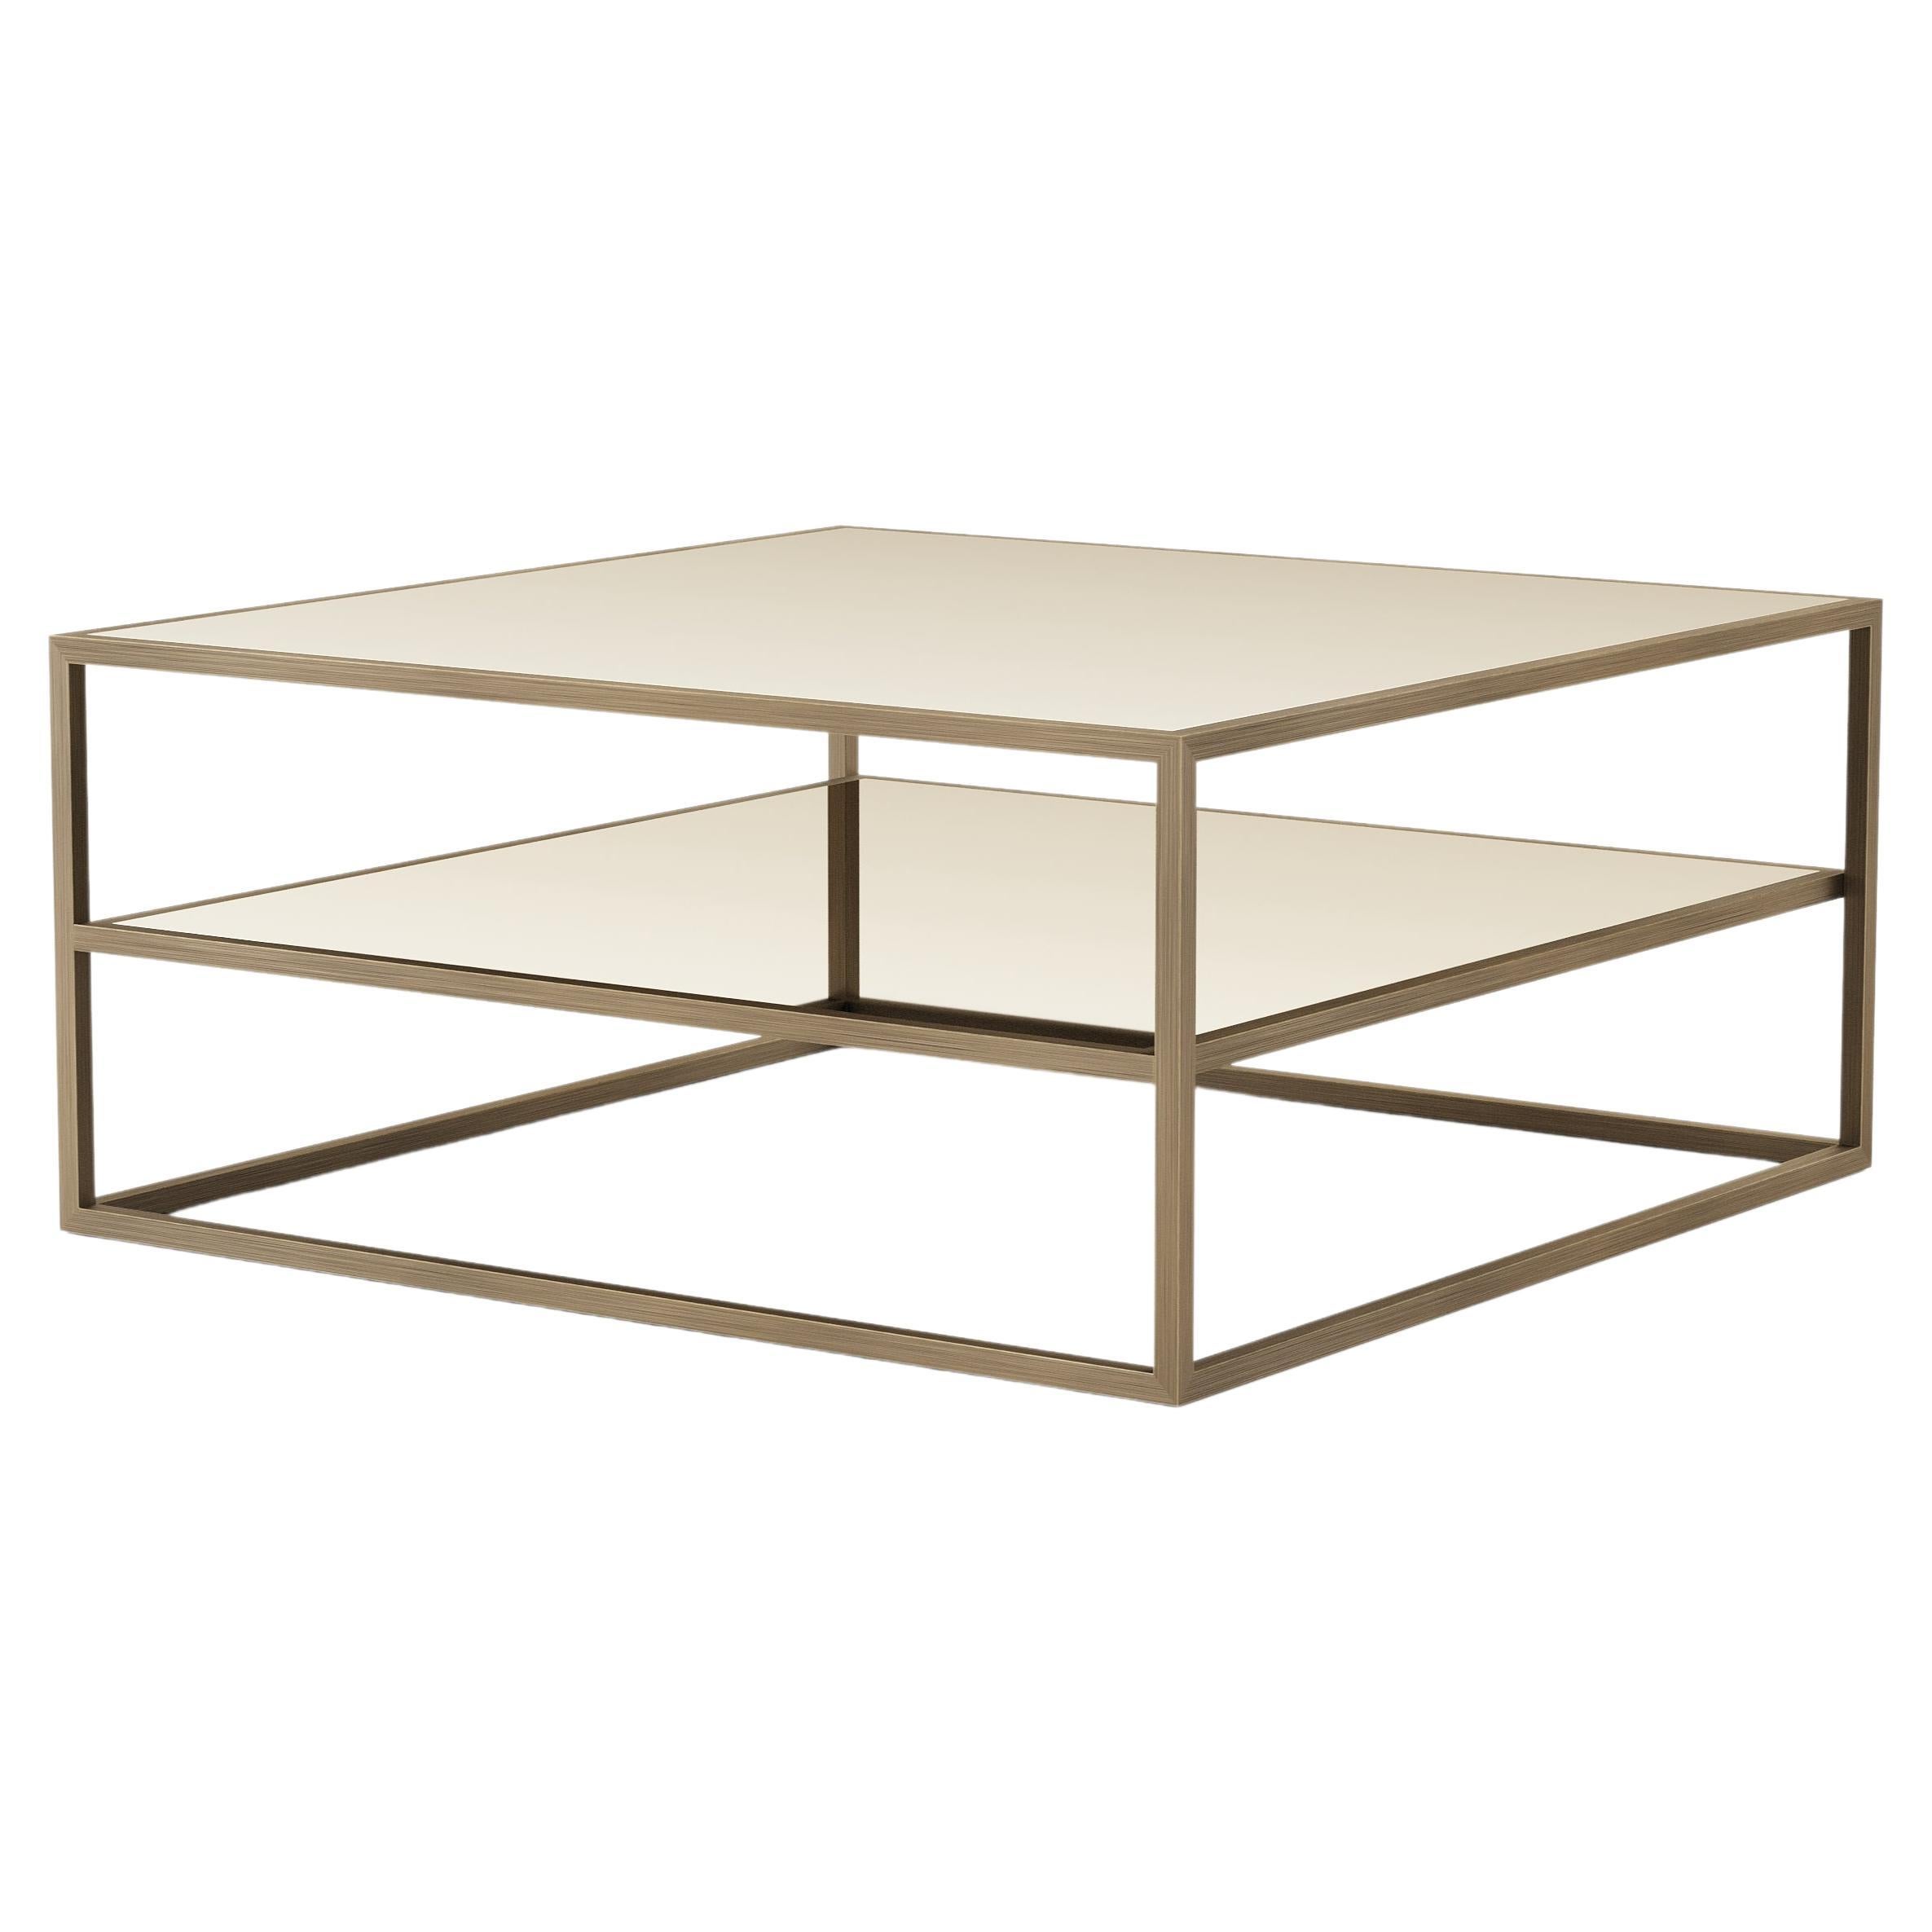 Modern style Bridge Coffee Table made with brass and glass, Handmade